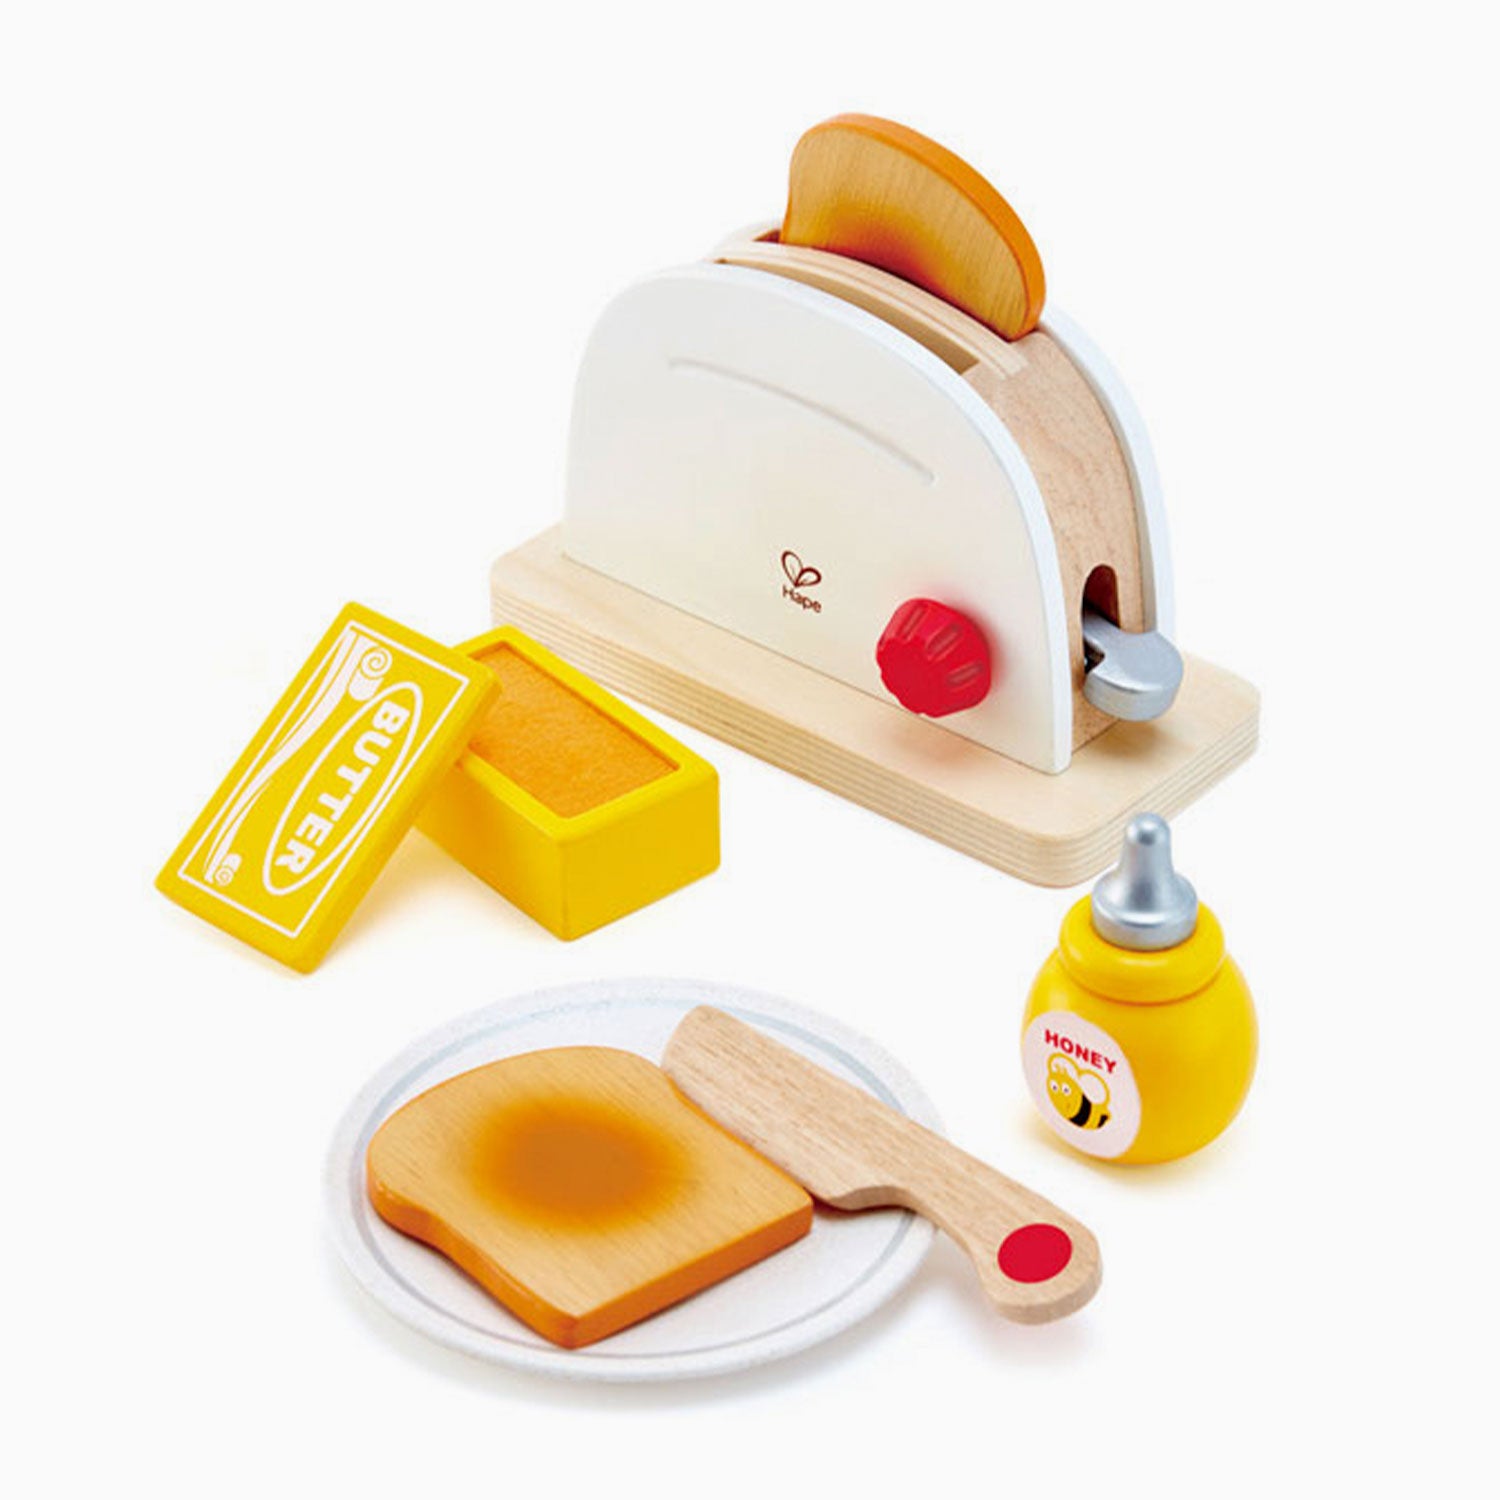 An image of Pop-Up Toaster Set - 7 Pieces - Pretend Toaster - Wooden Toys | Hape